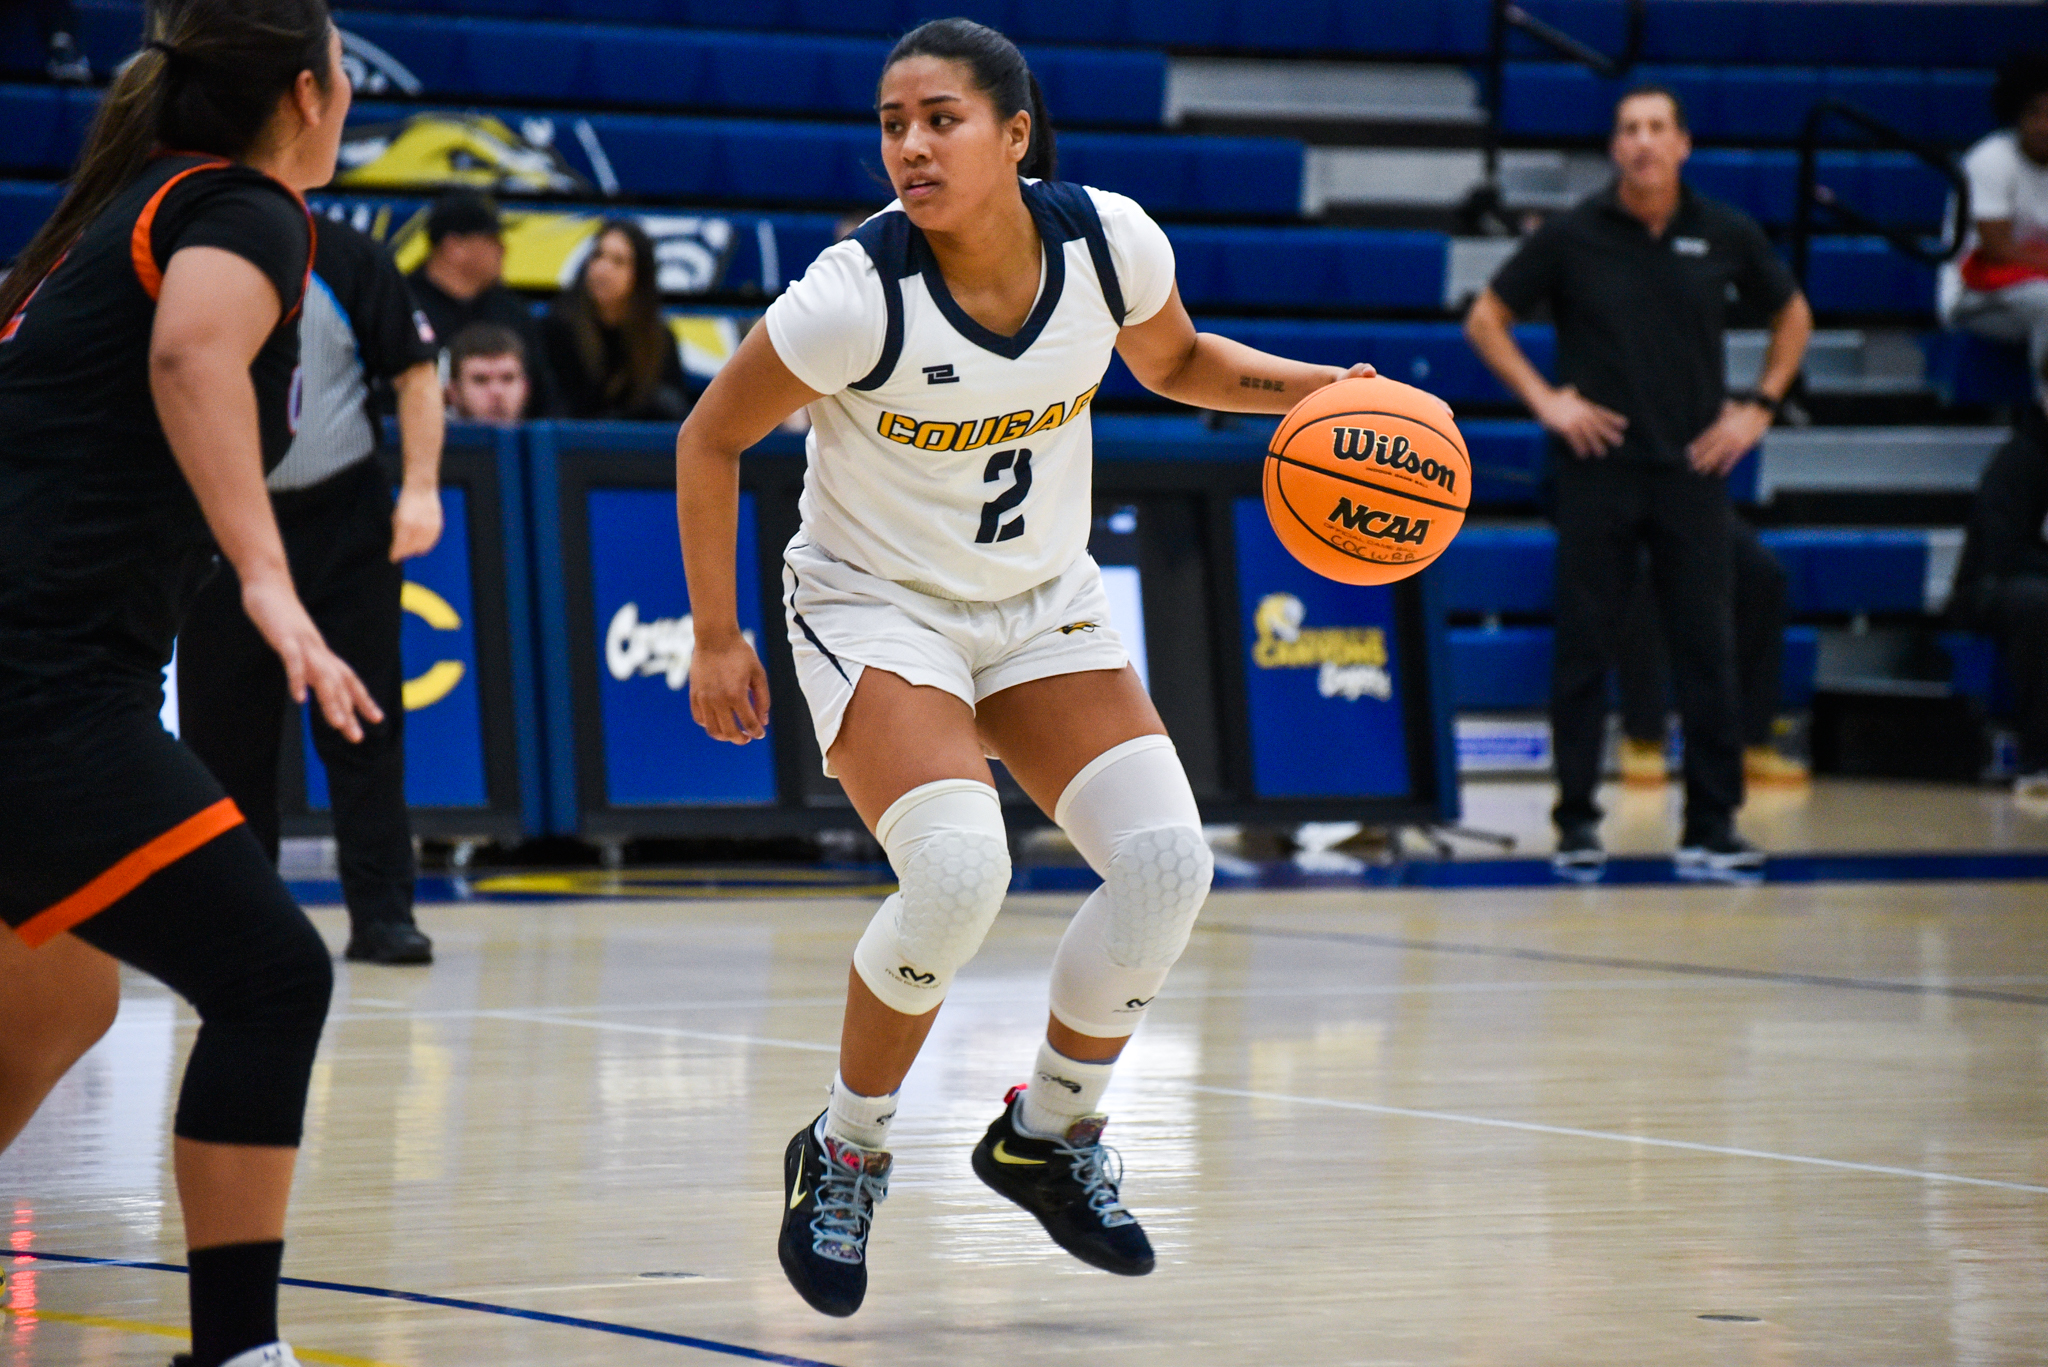 College of the Canyons women's basketball vs. Citrus College on Jan. 11, 2023.